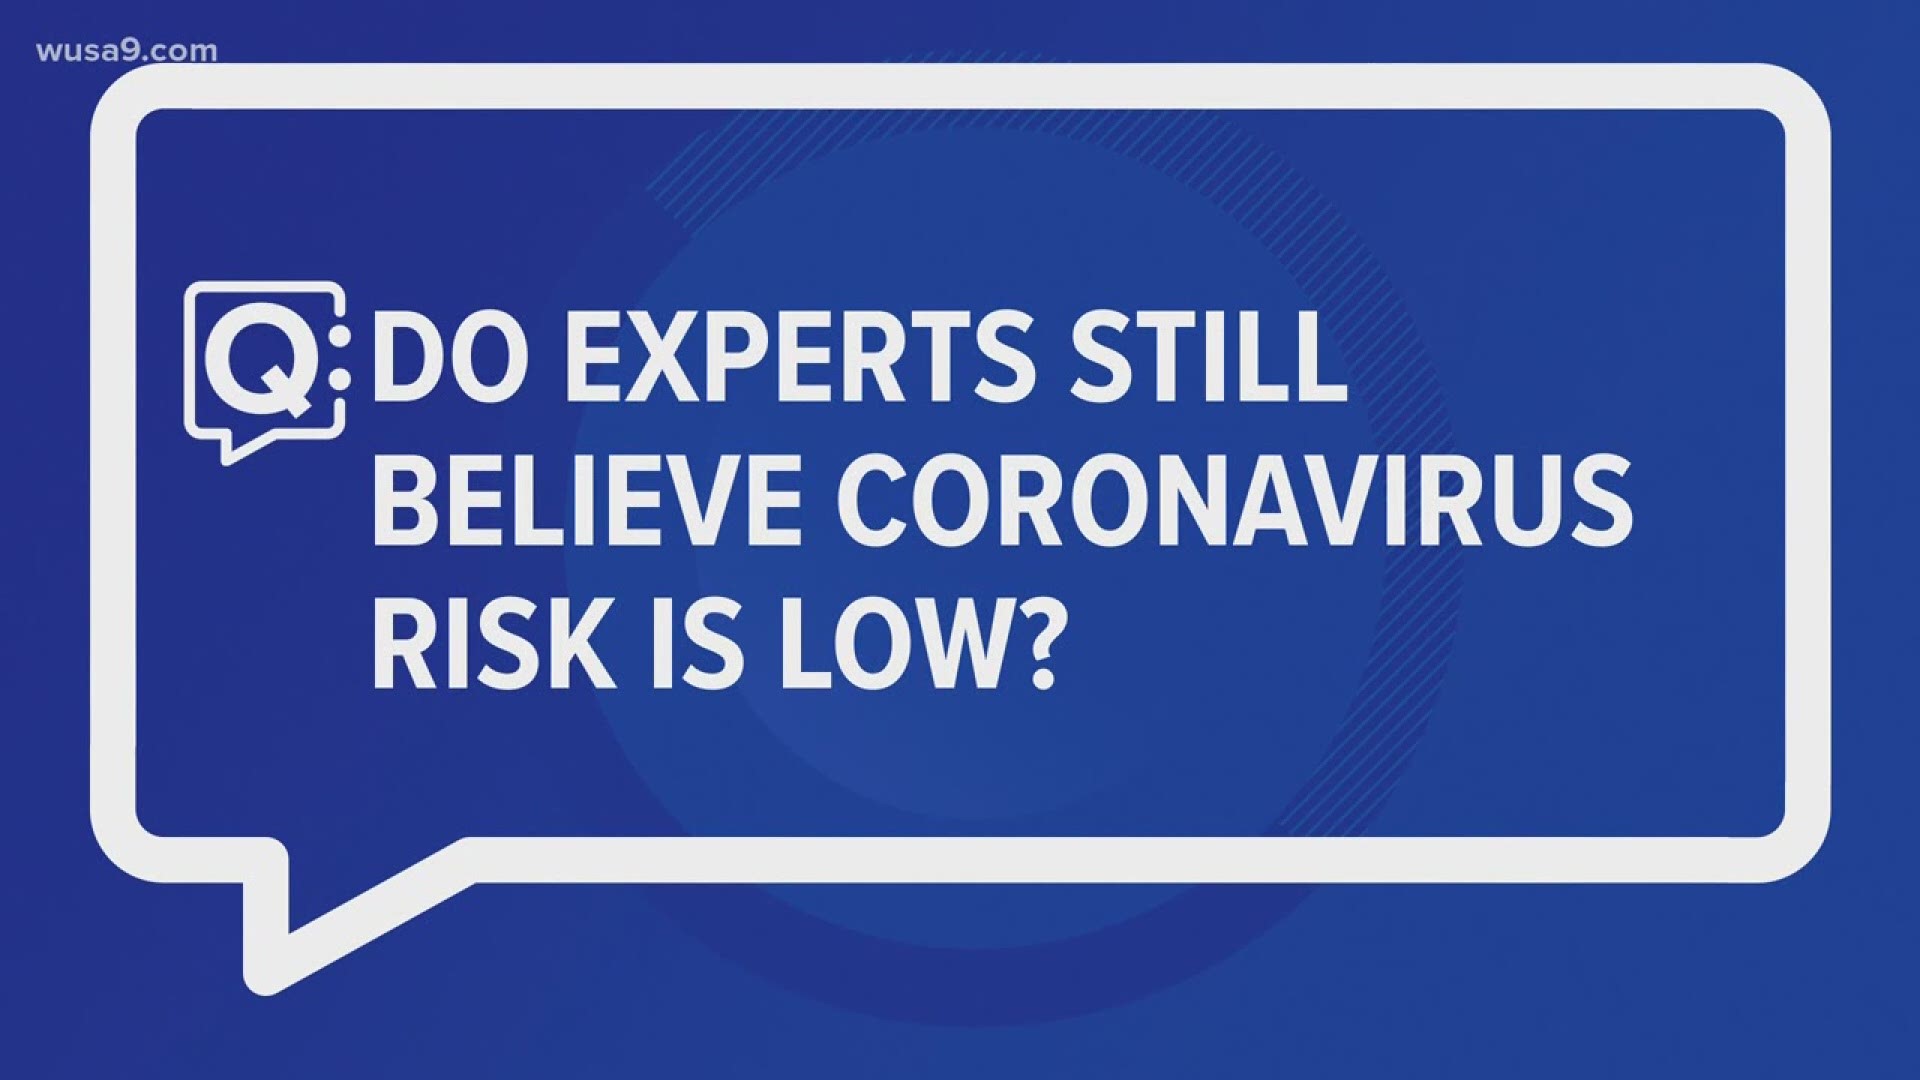 U.S. Health officials are bracing for a potential impact. The Coronavirus could become a pandemic here in the States.